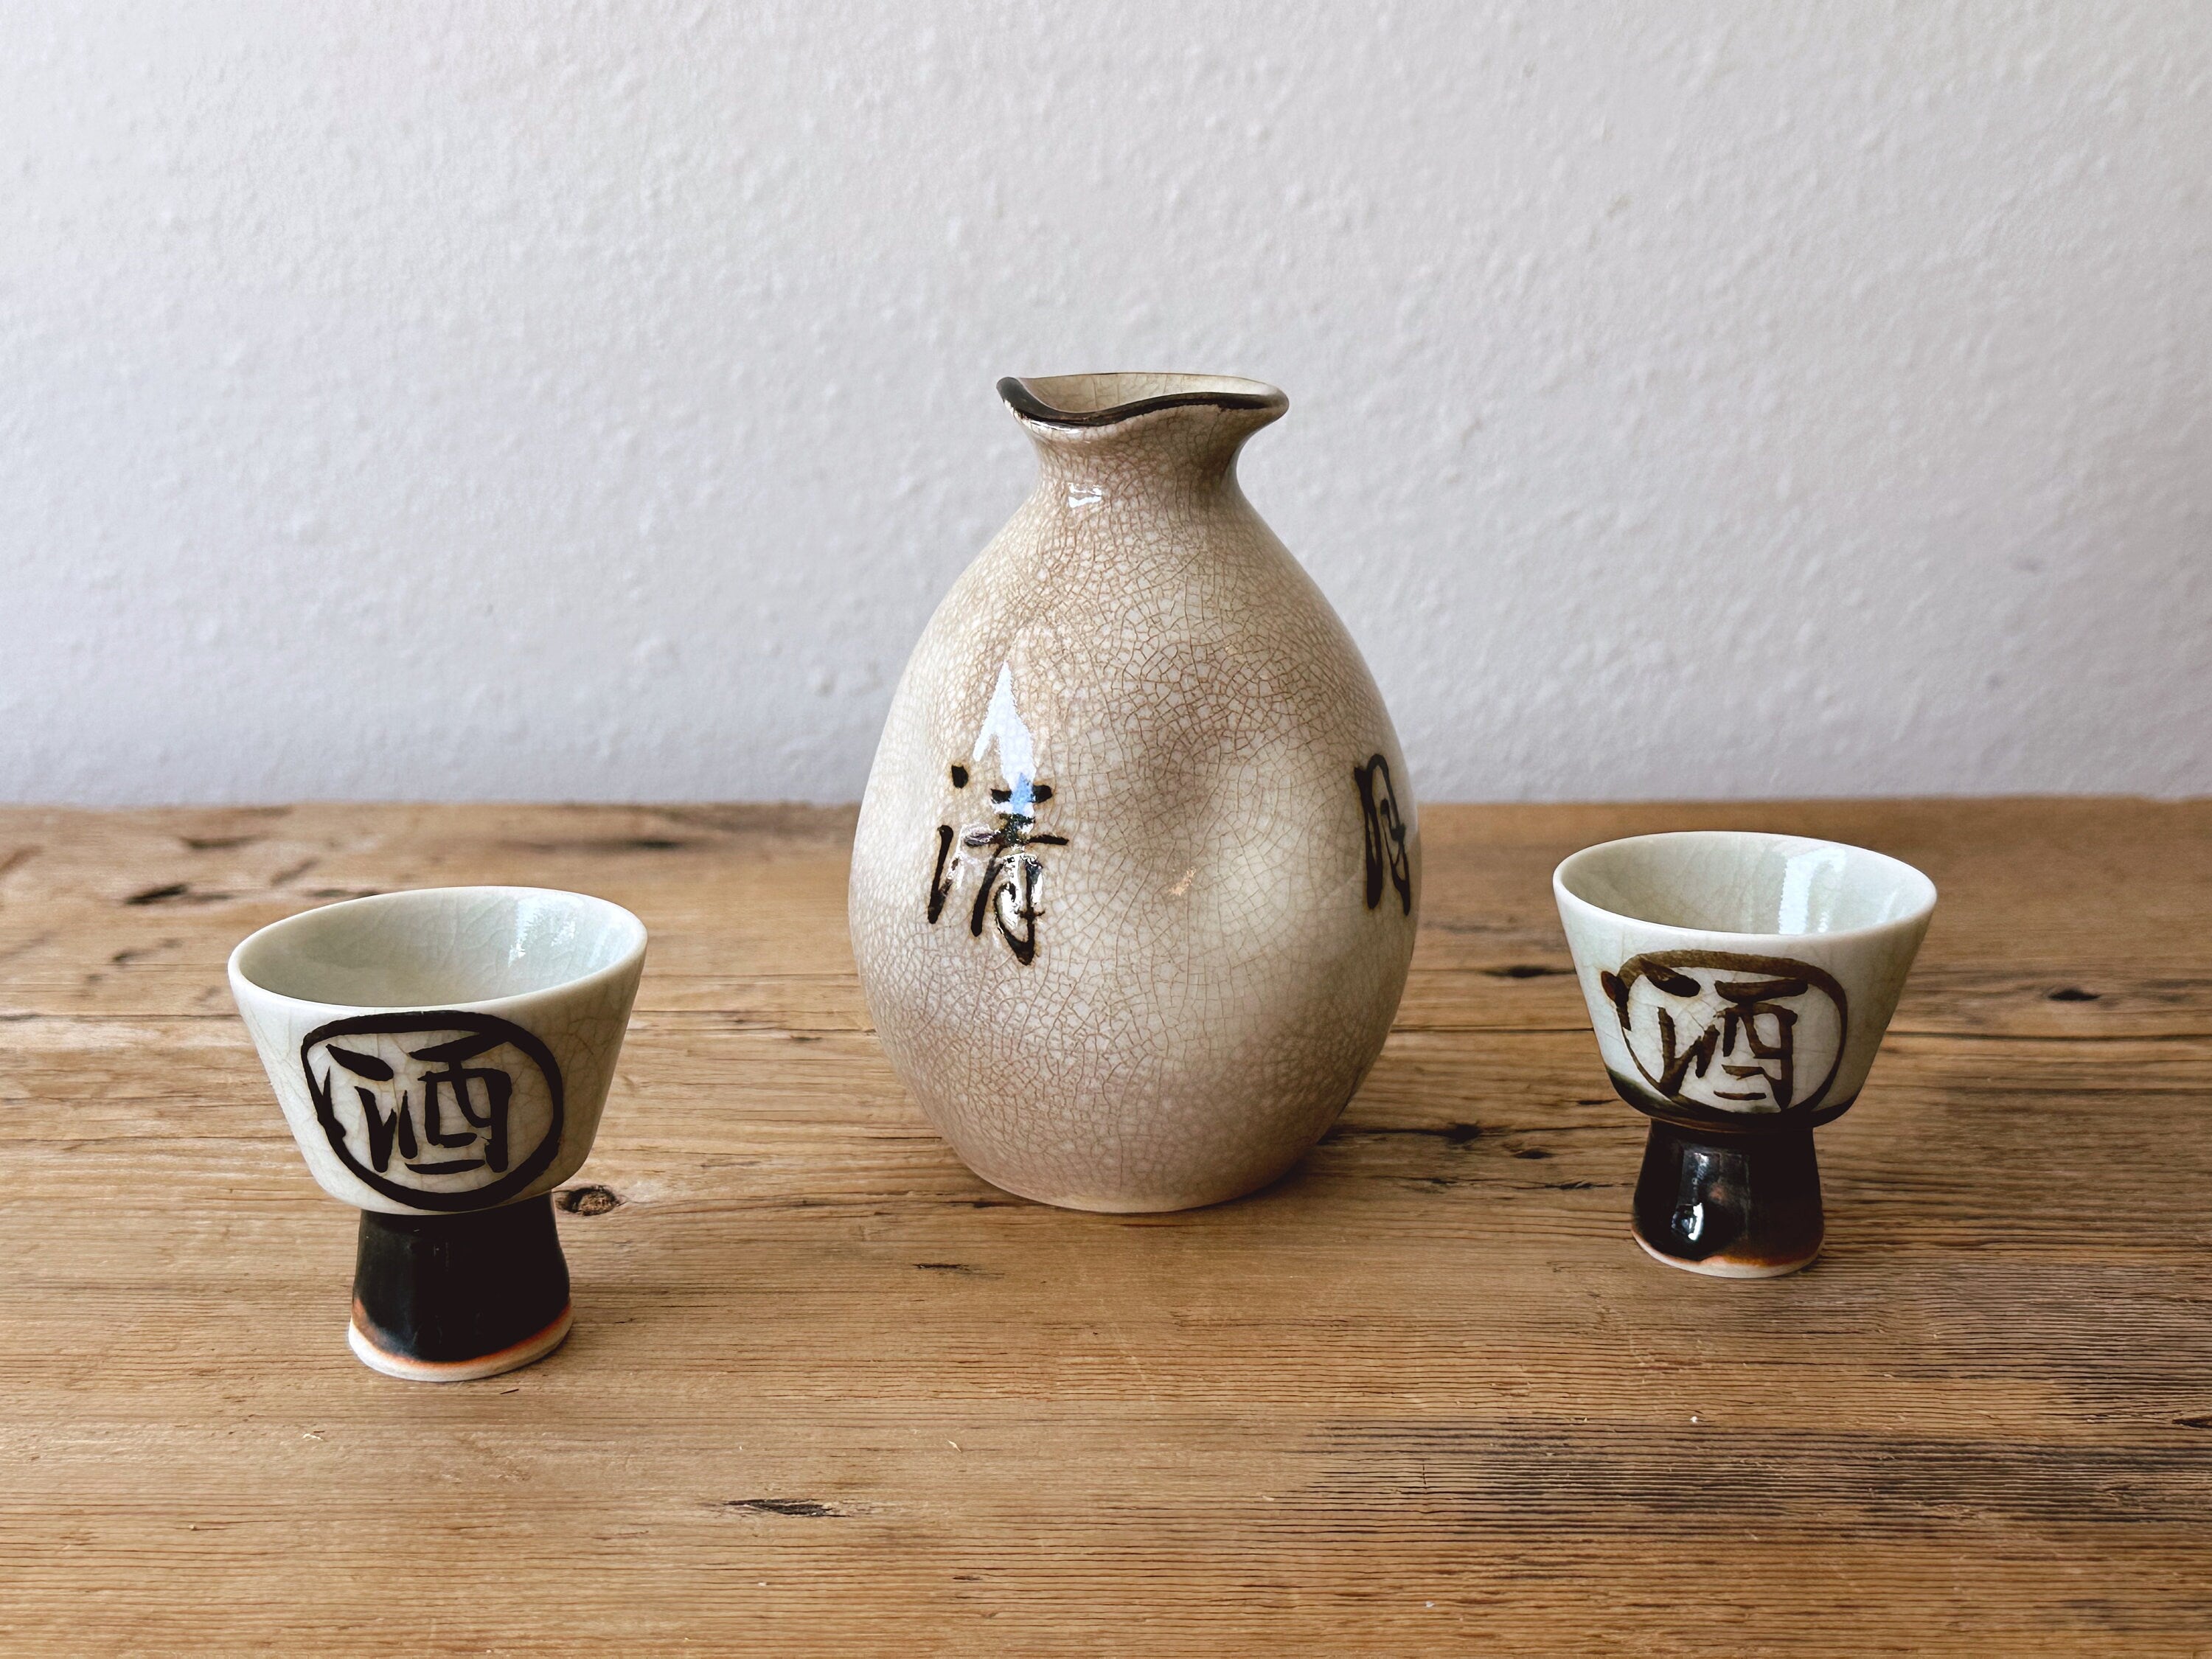 Vintage 3-Piece Ceramic Japanese Sake Set with Carafe and Two Cups | Asian Style Decor Barware Drinkware Set